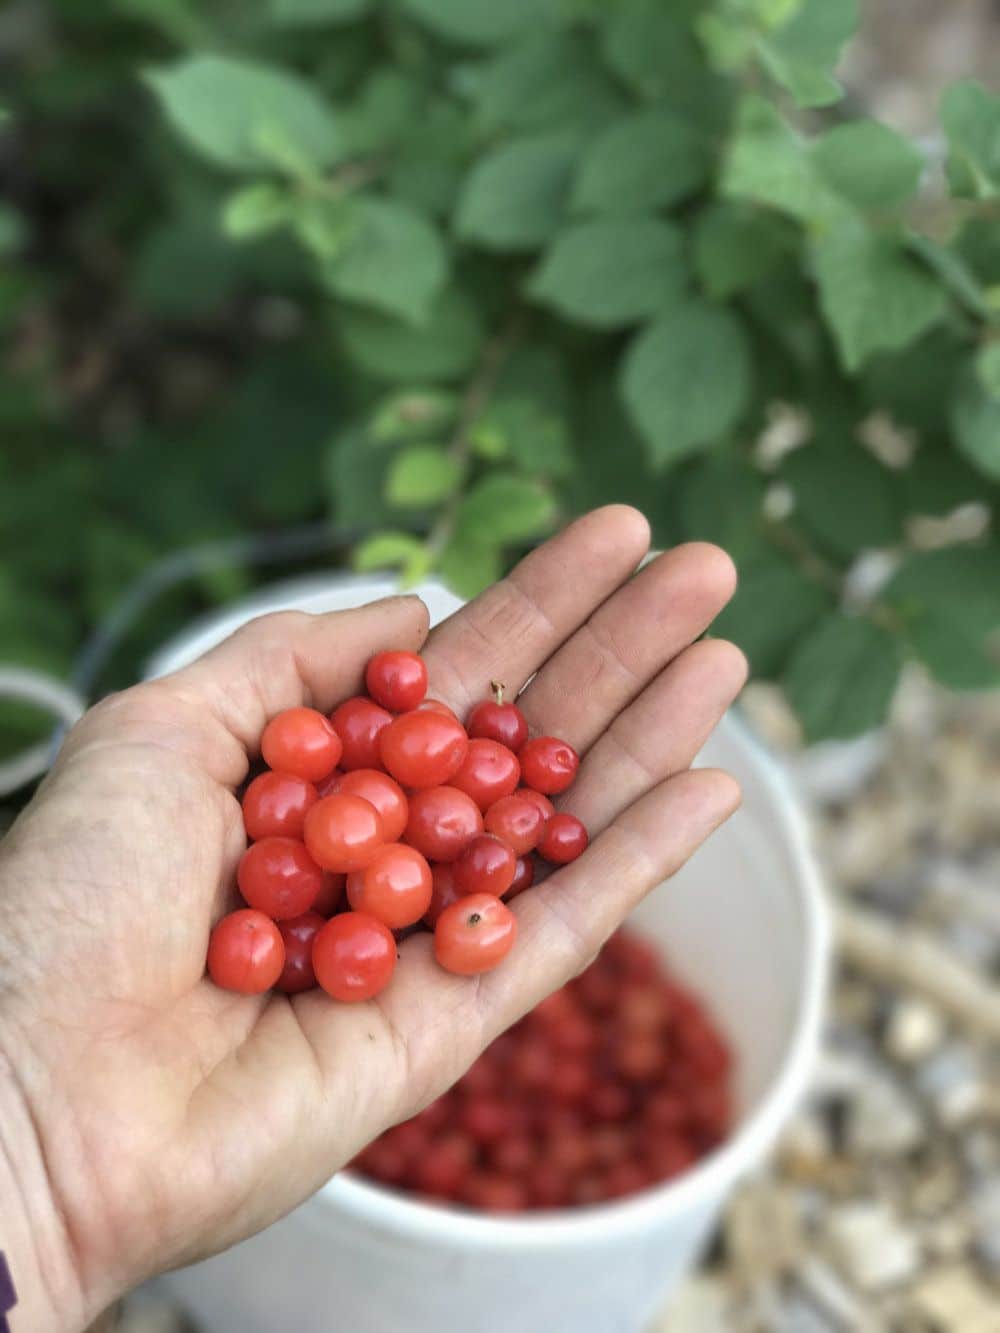 A hand holds freshly picked Goldberry cherries.